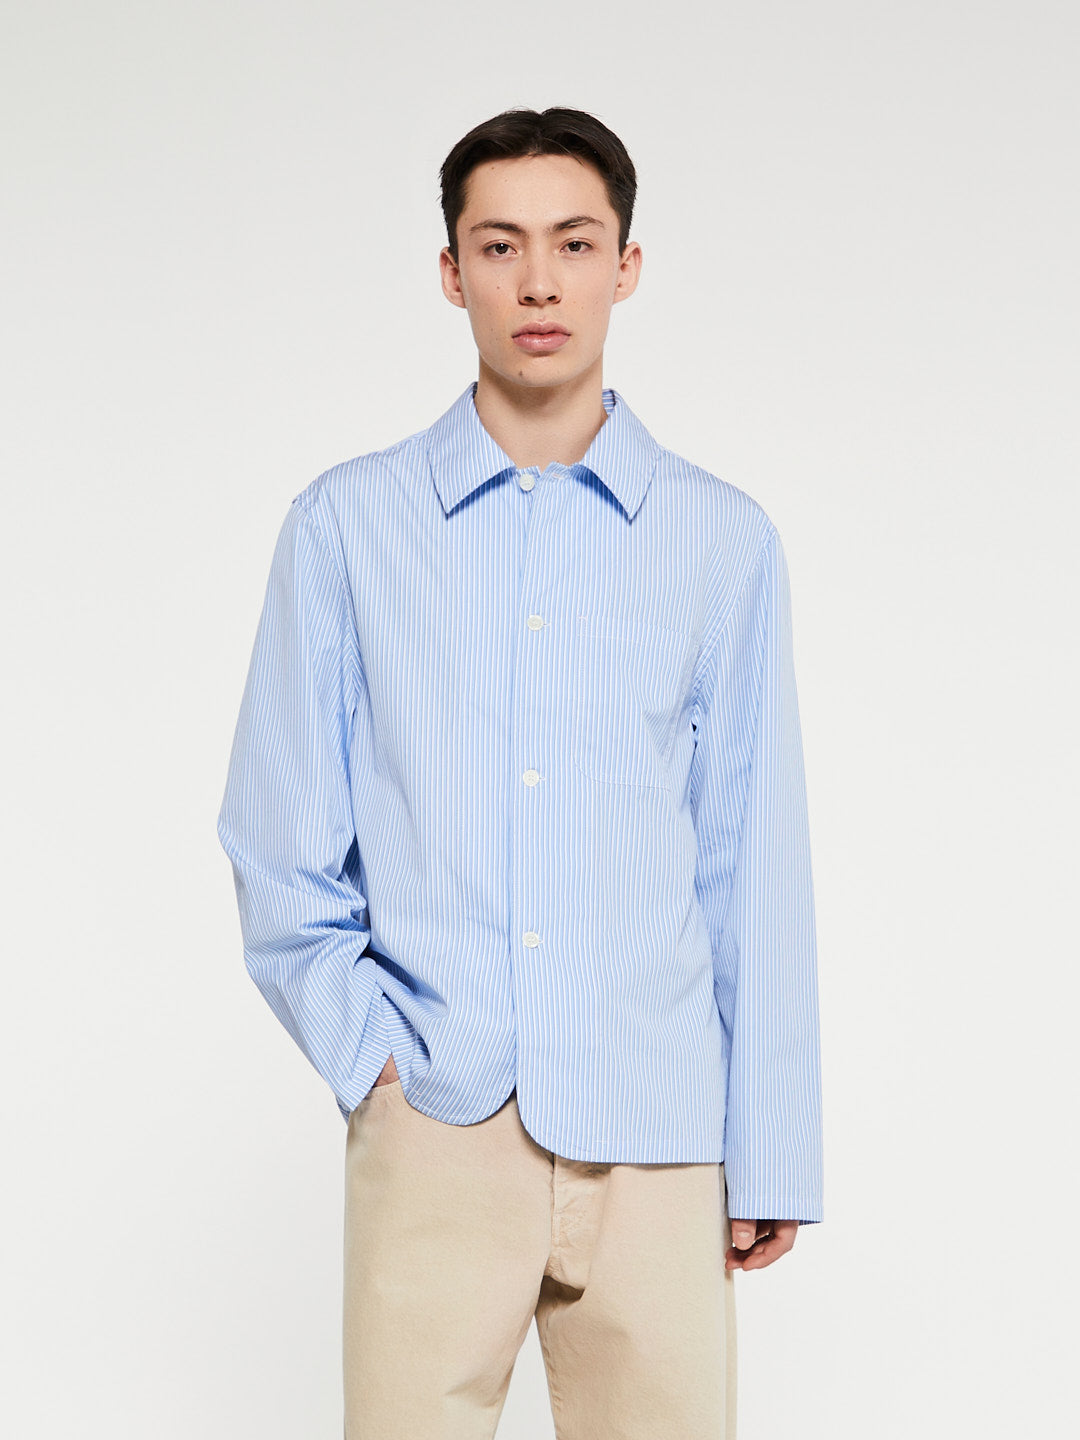 Another Aspect - Another Shirt 7.0 in Small Light Blue Stripe